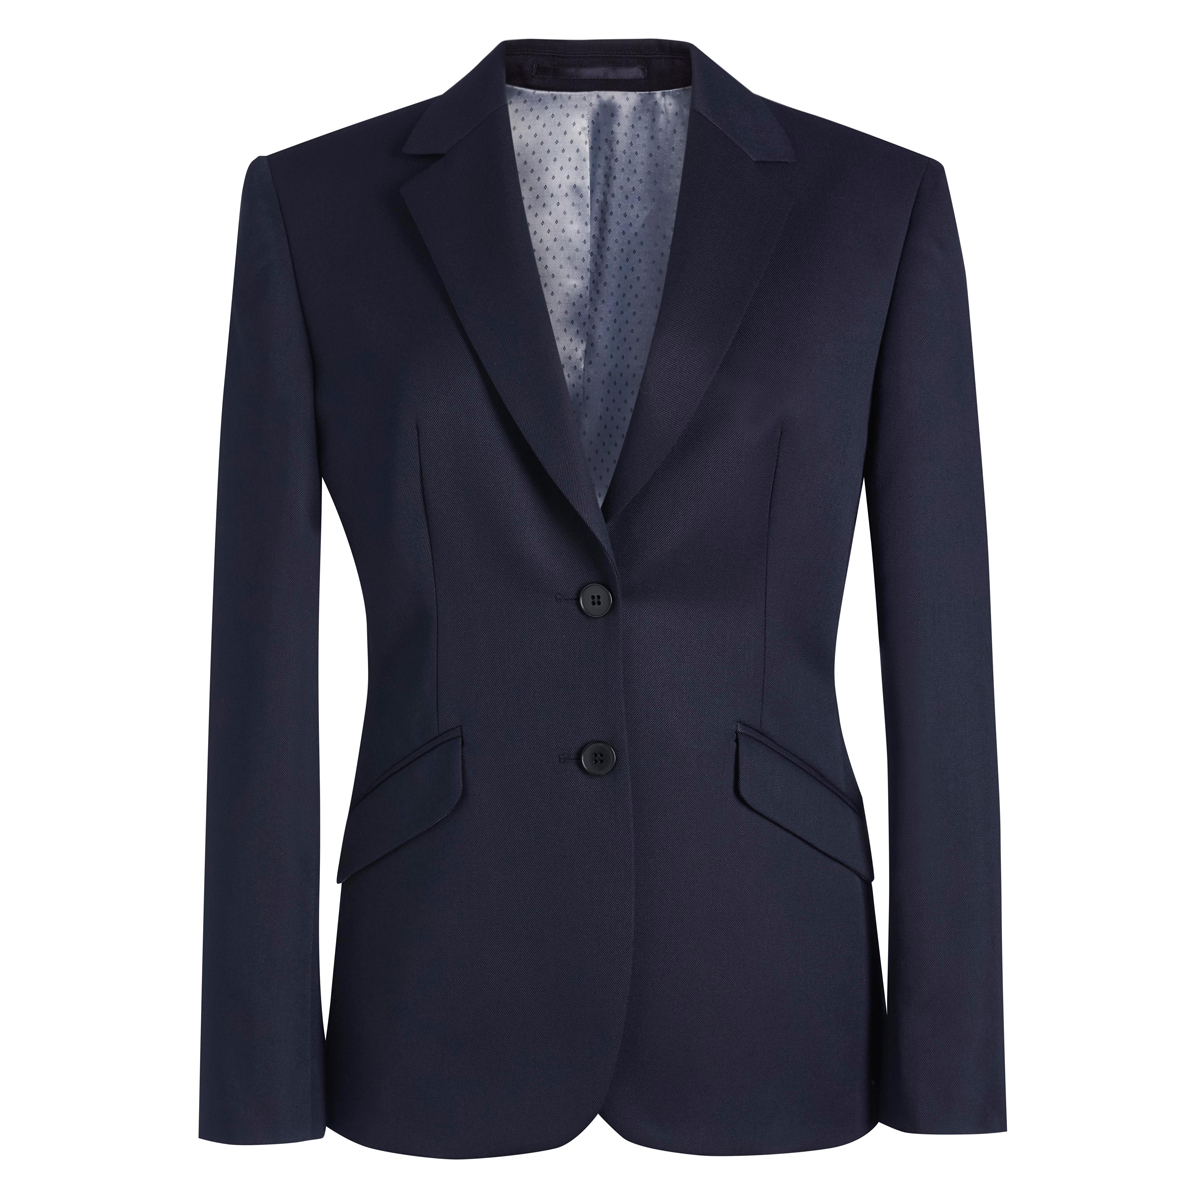 Hebe classic fit jacket navy 06r